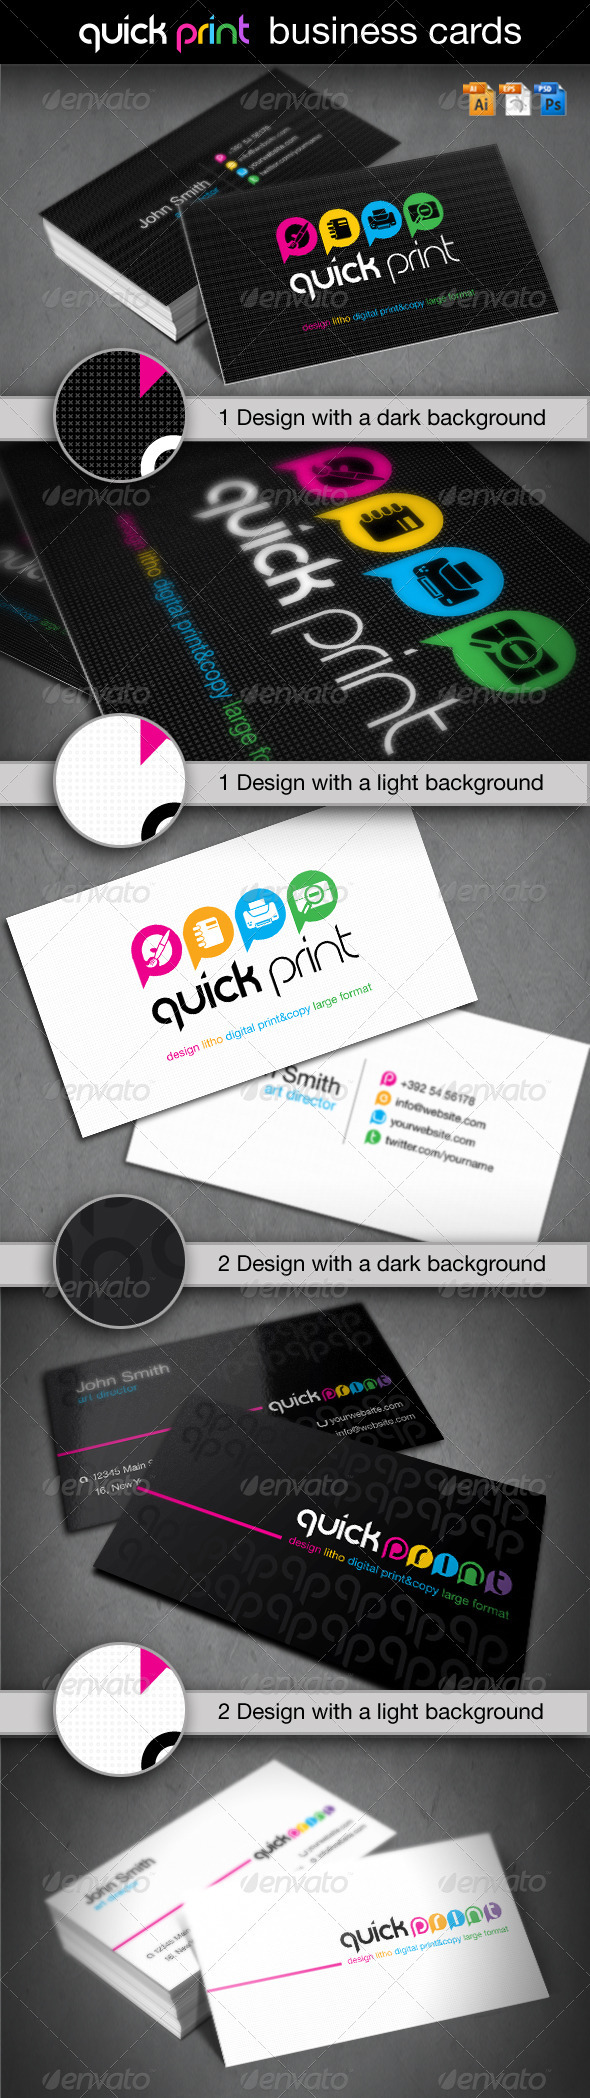 Quick Print Business Cards By Oleana